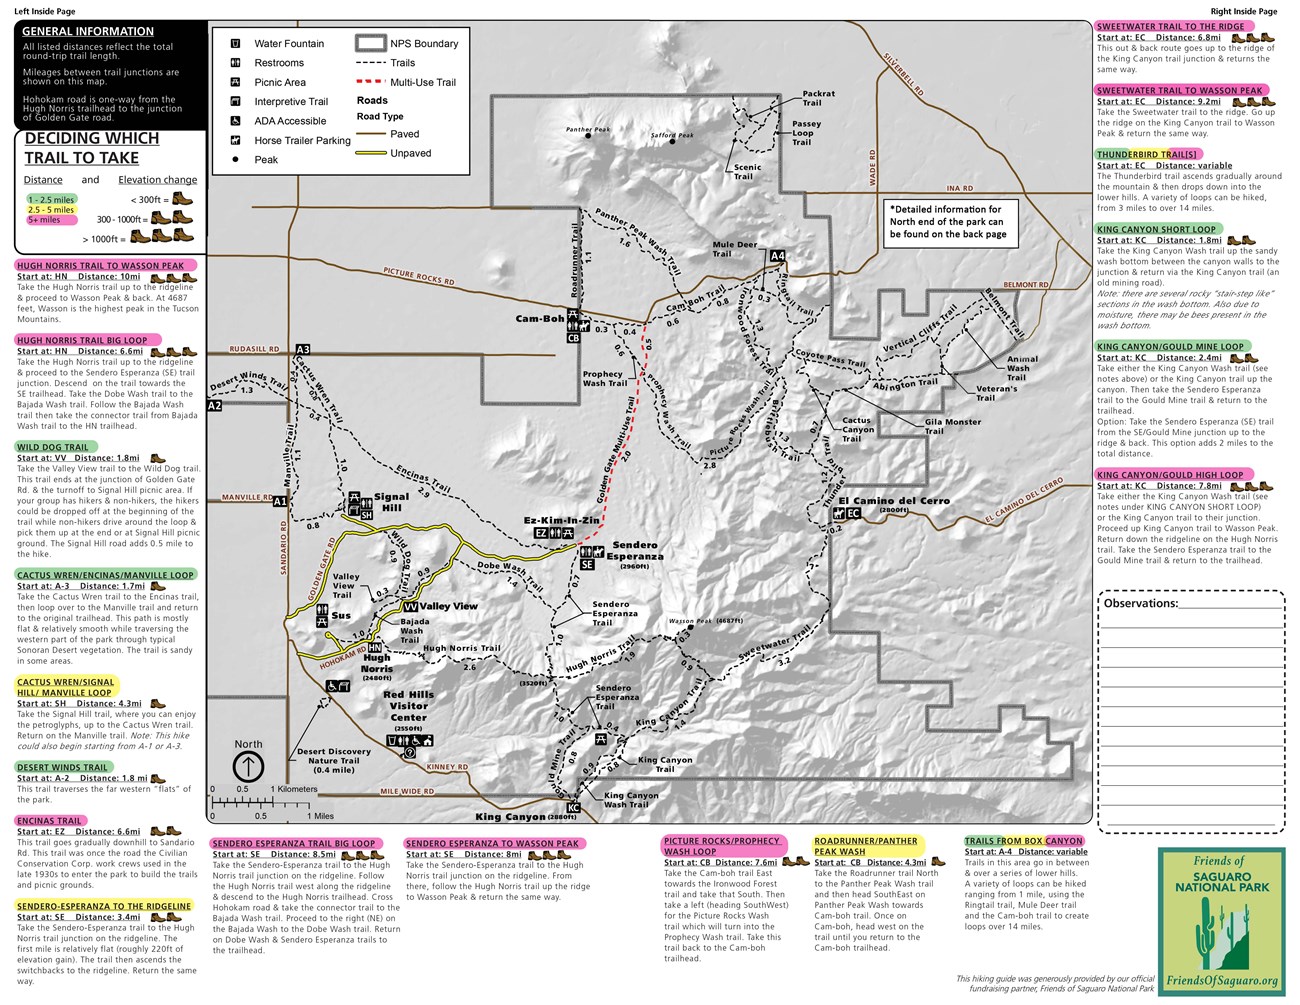 Hiking guide for the West District of Saguaro National Park